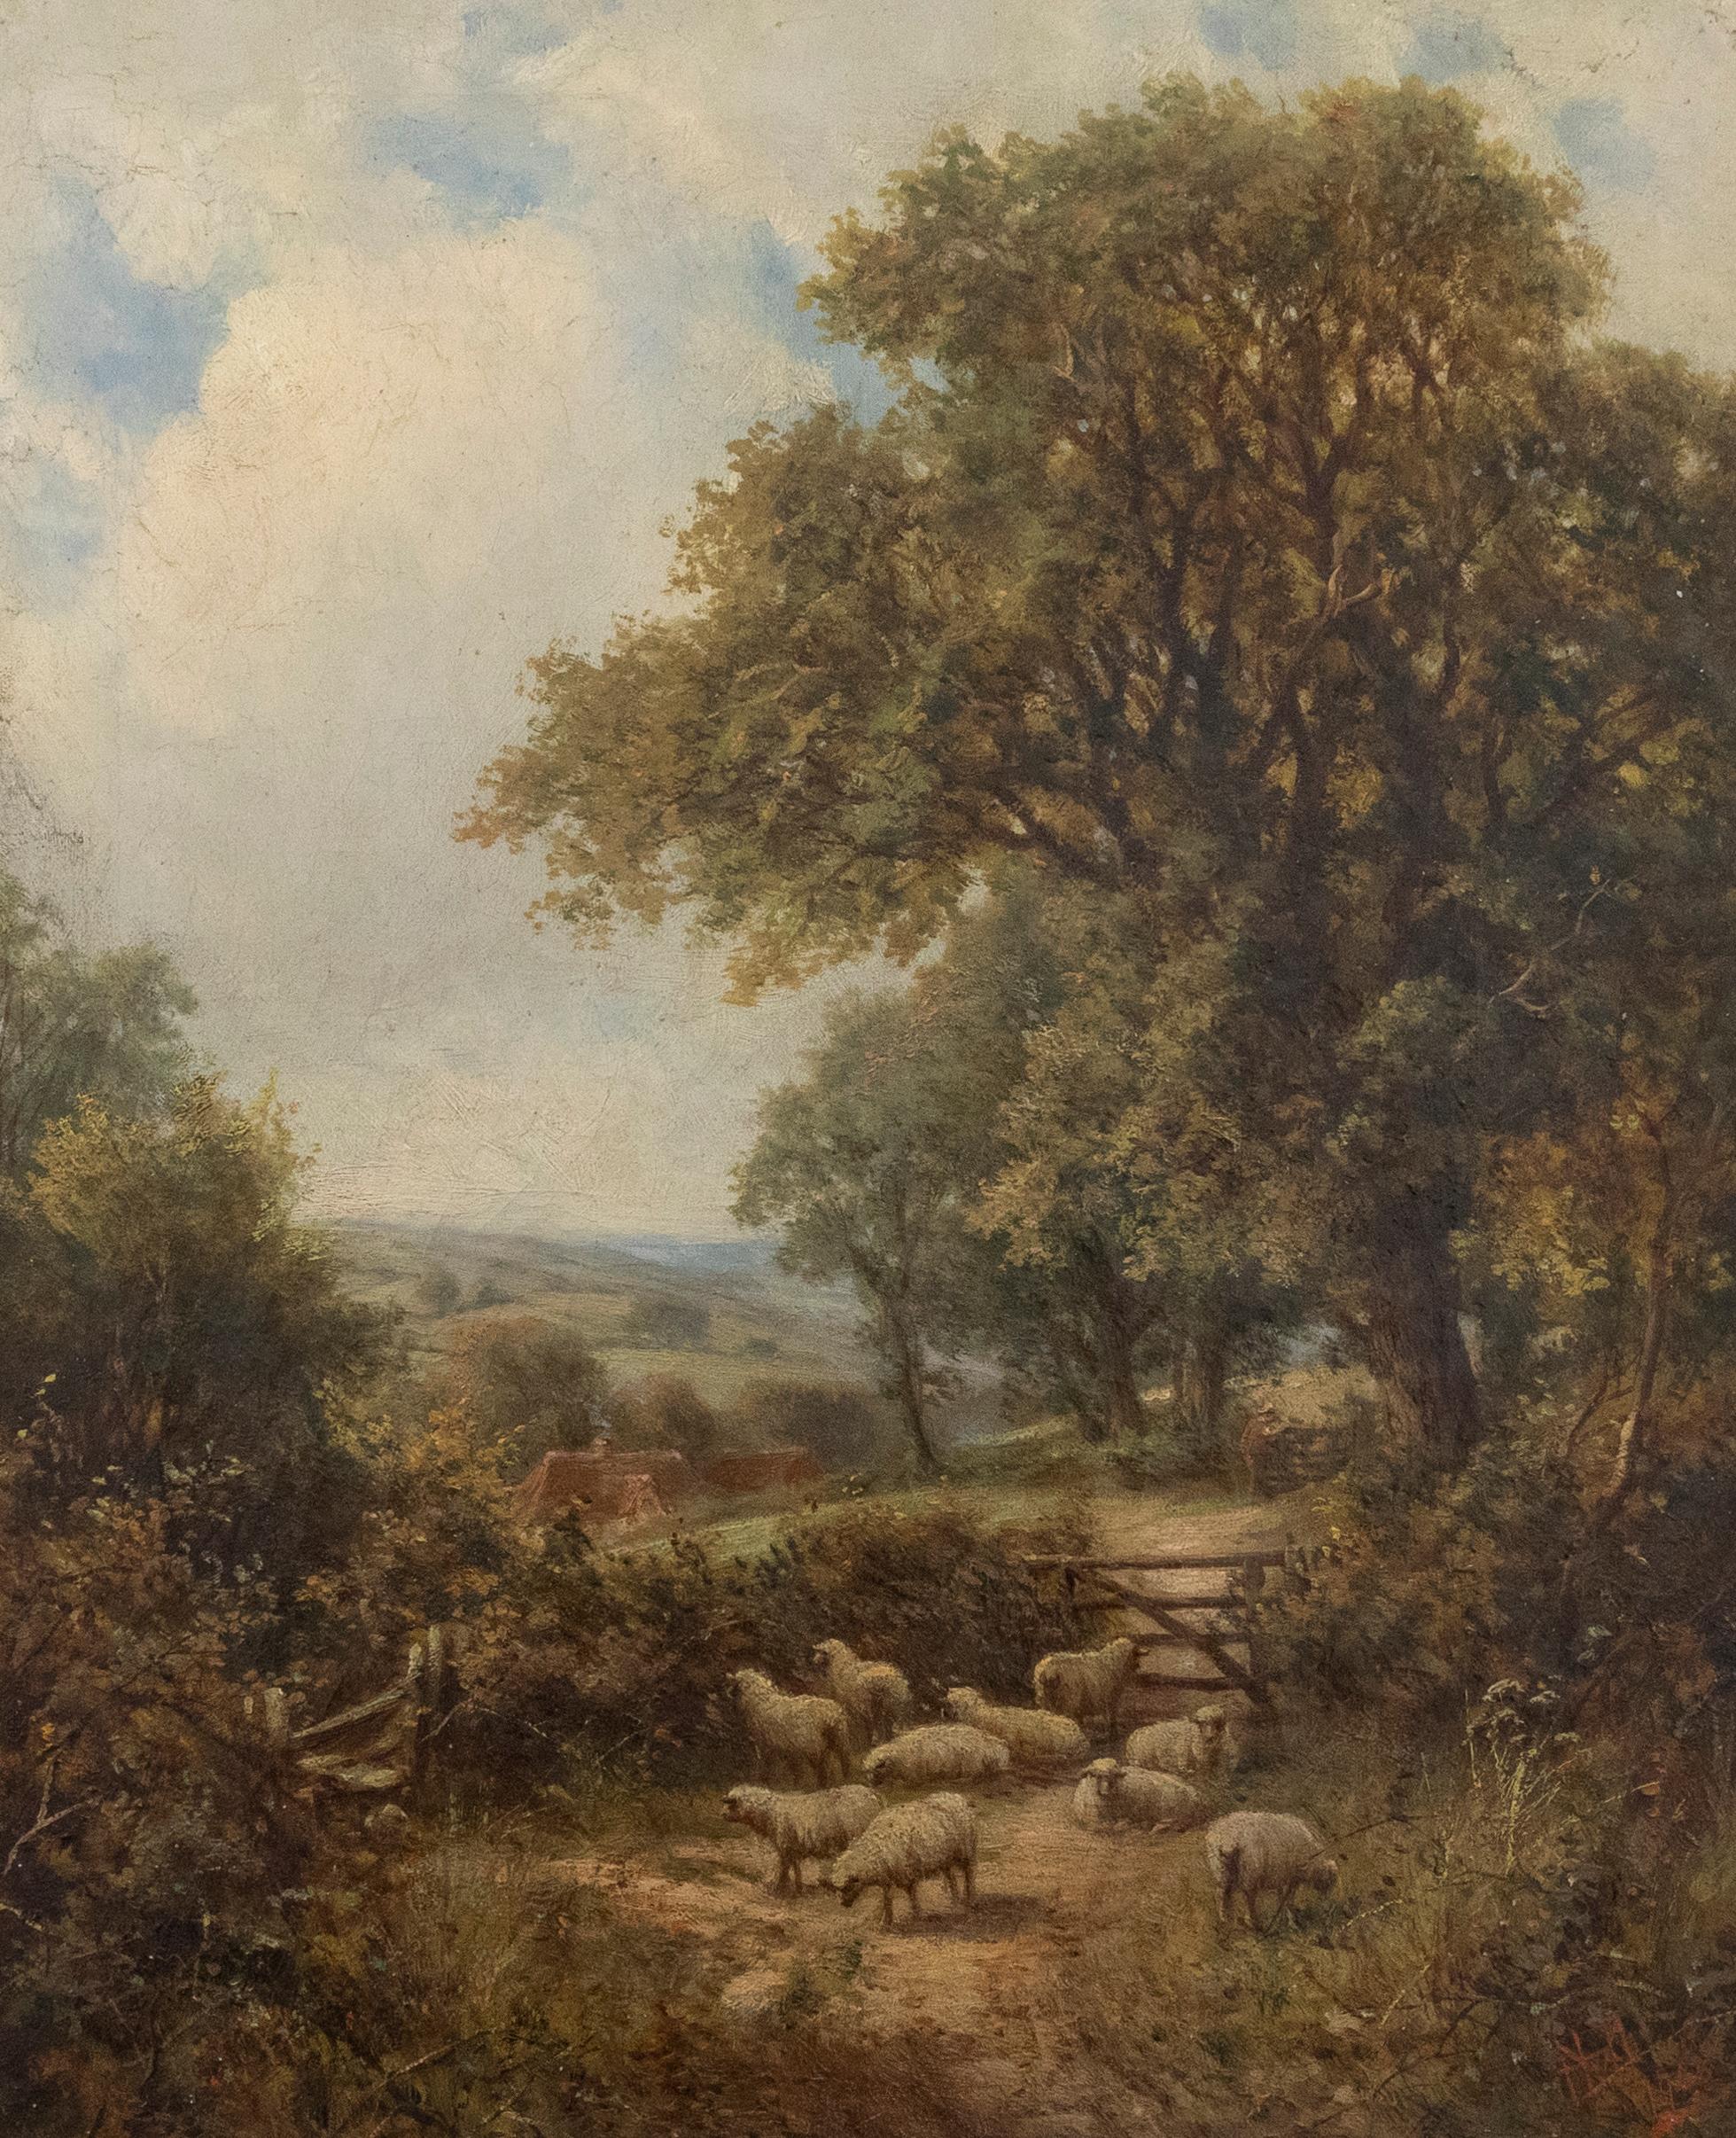 A stunning early 20th century genre scene by British artist Henry Maidment (act.1889-1914). In the foreground a small flock of sheep can be seen contently grazing a quiet fenced field. All apart from one that has its eyes fixed on a swift moving